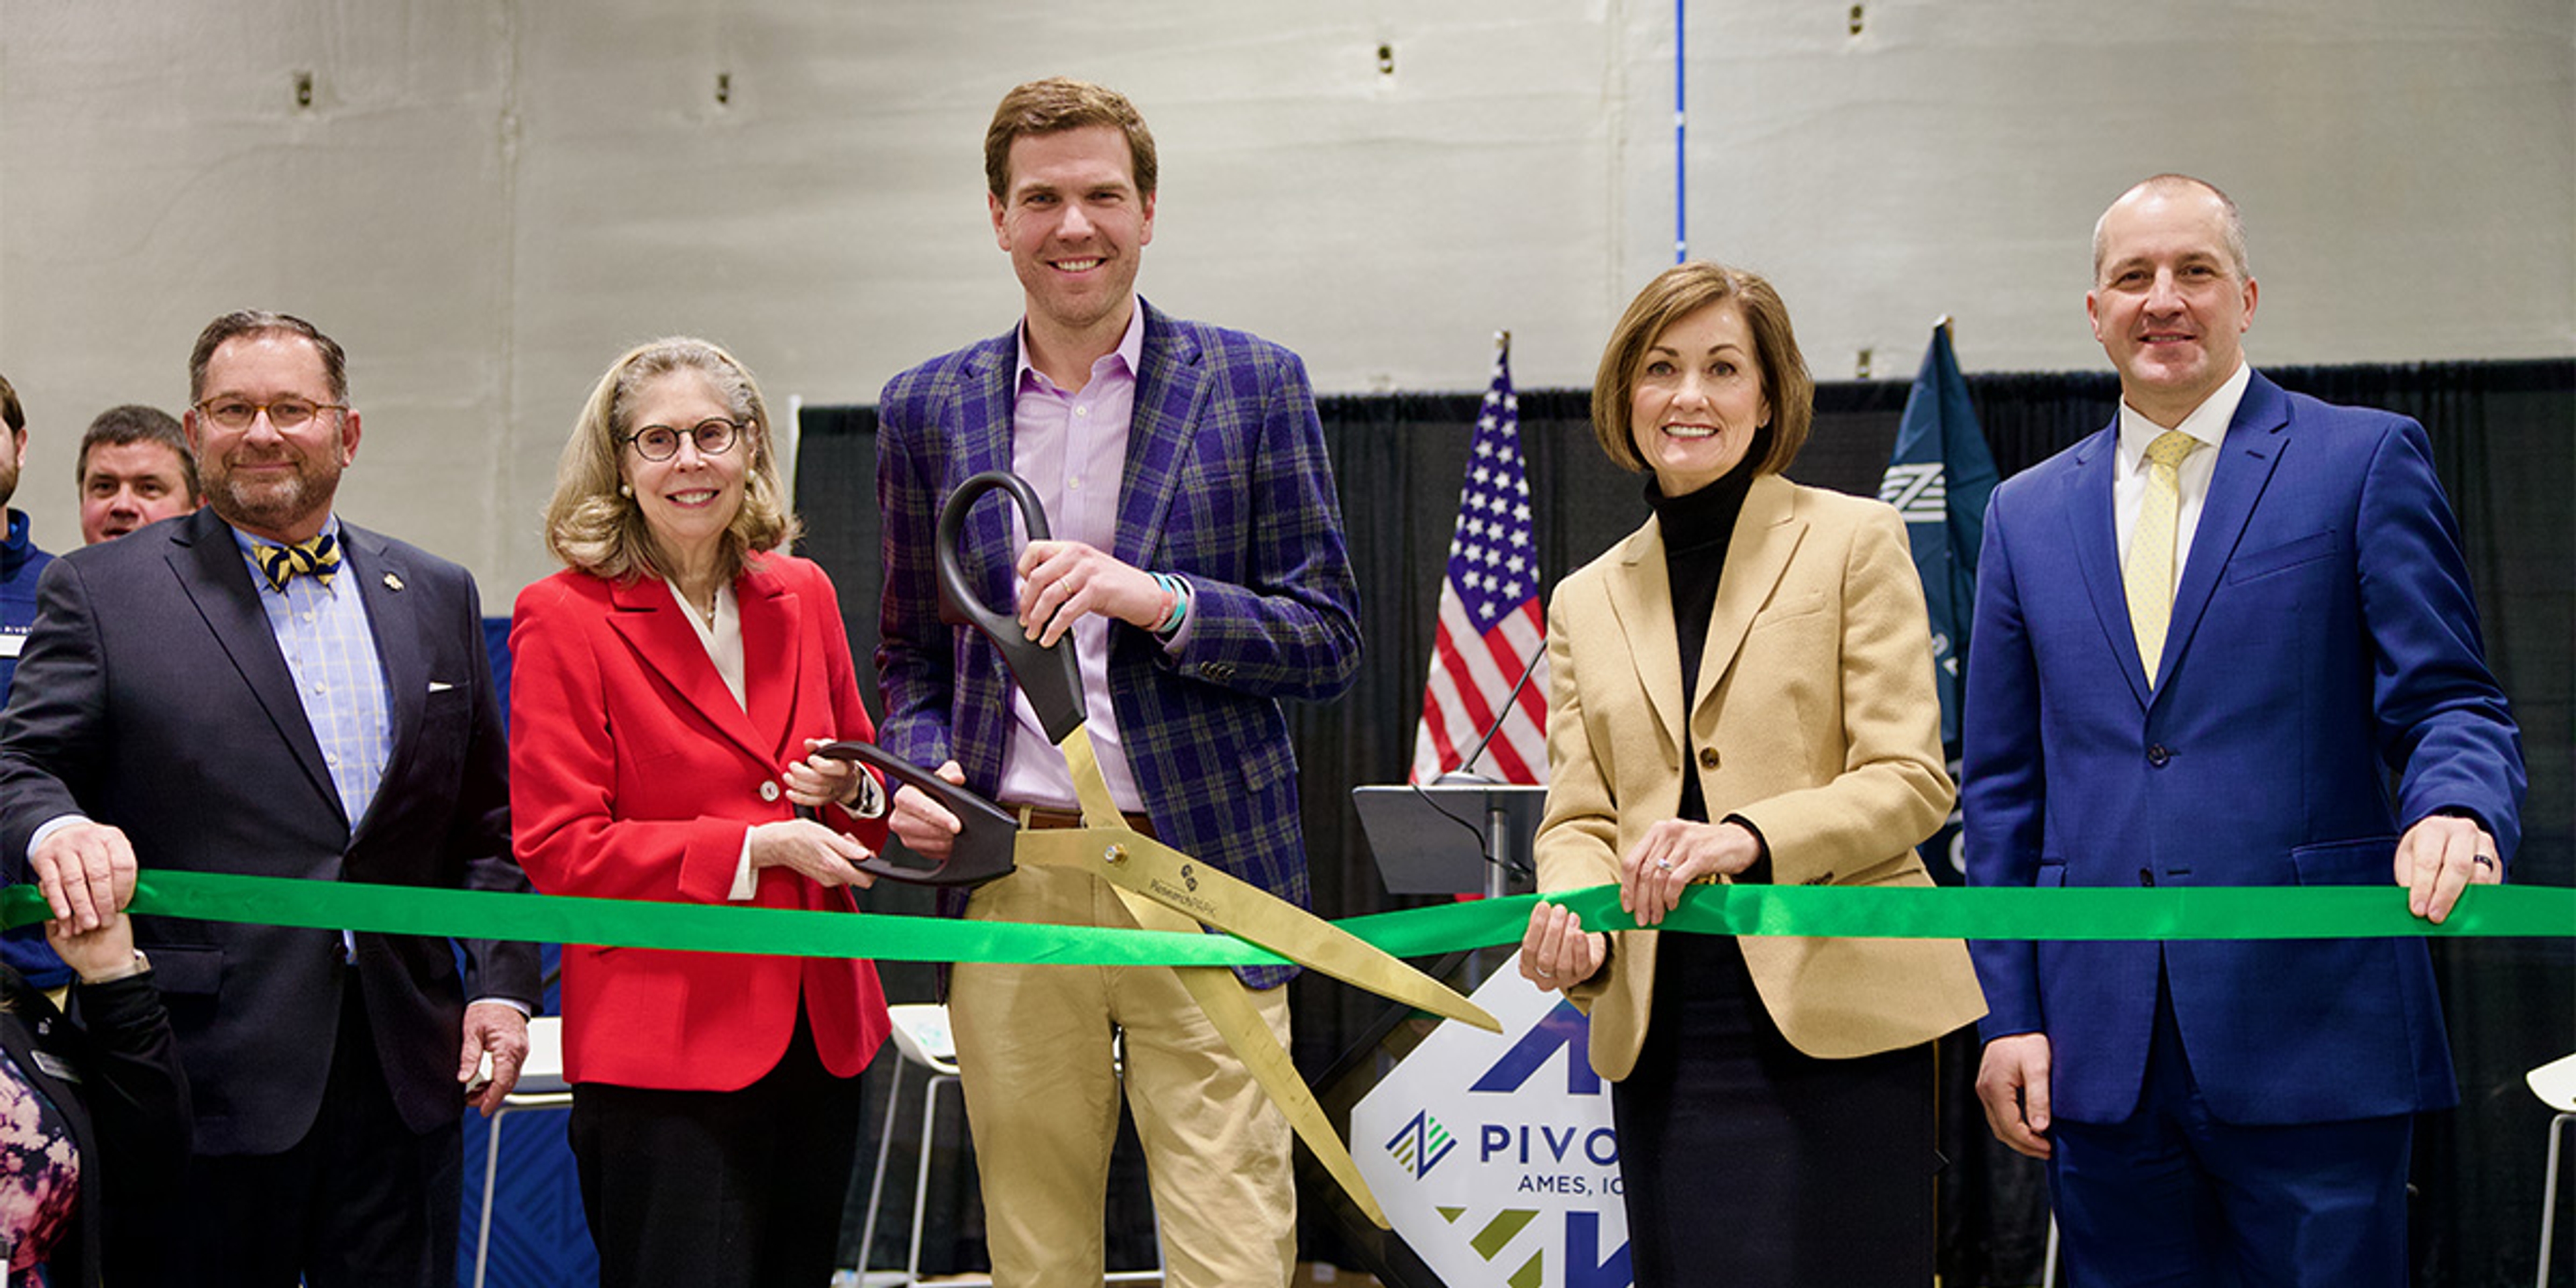 Pivot Bio and ISU Partner on New Center for Sustainable Agriculture